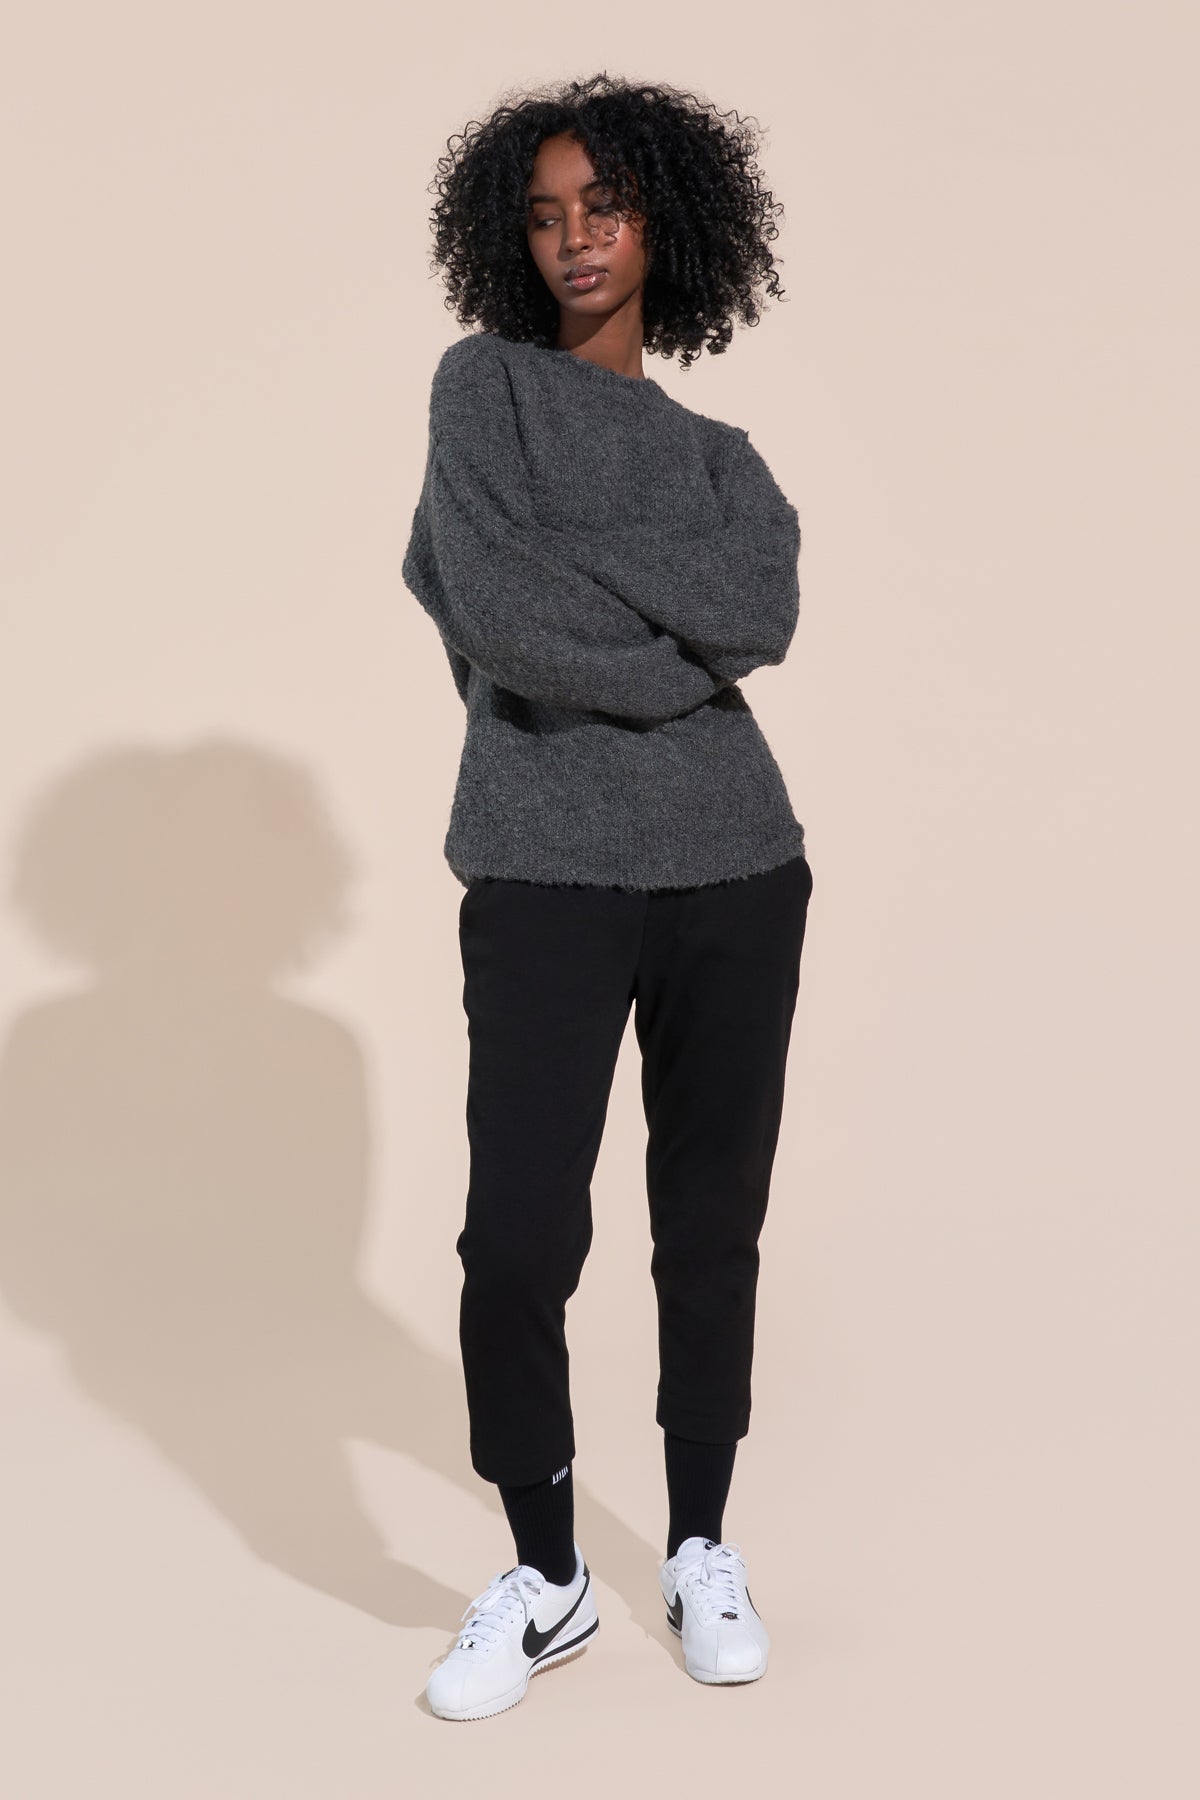 kennedy article 6 boucle knit sweater